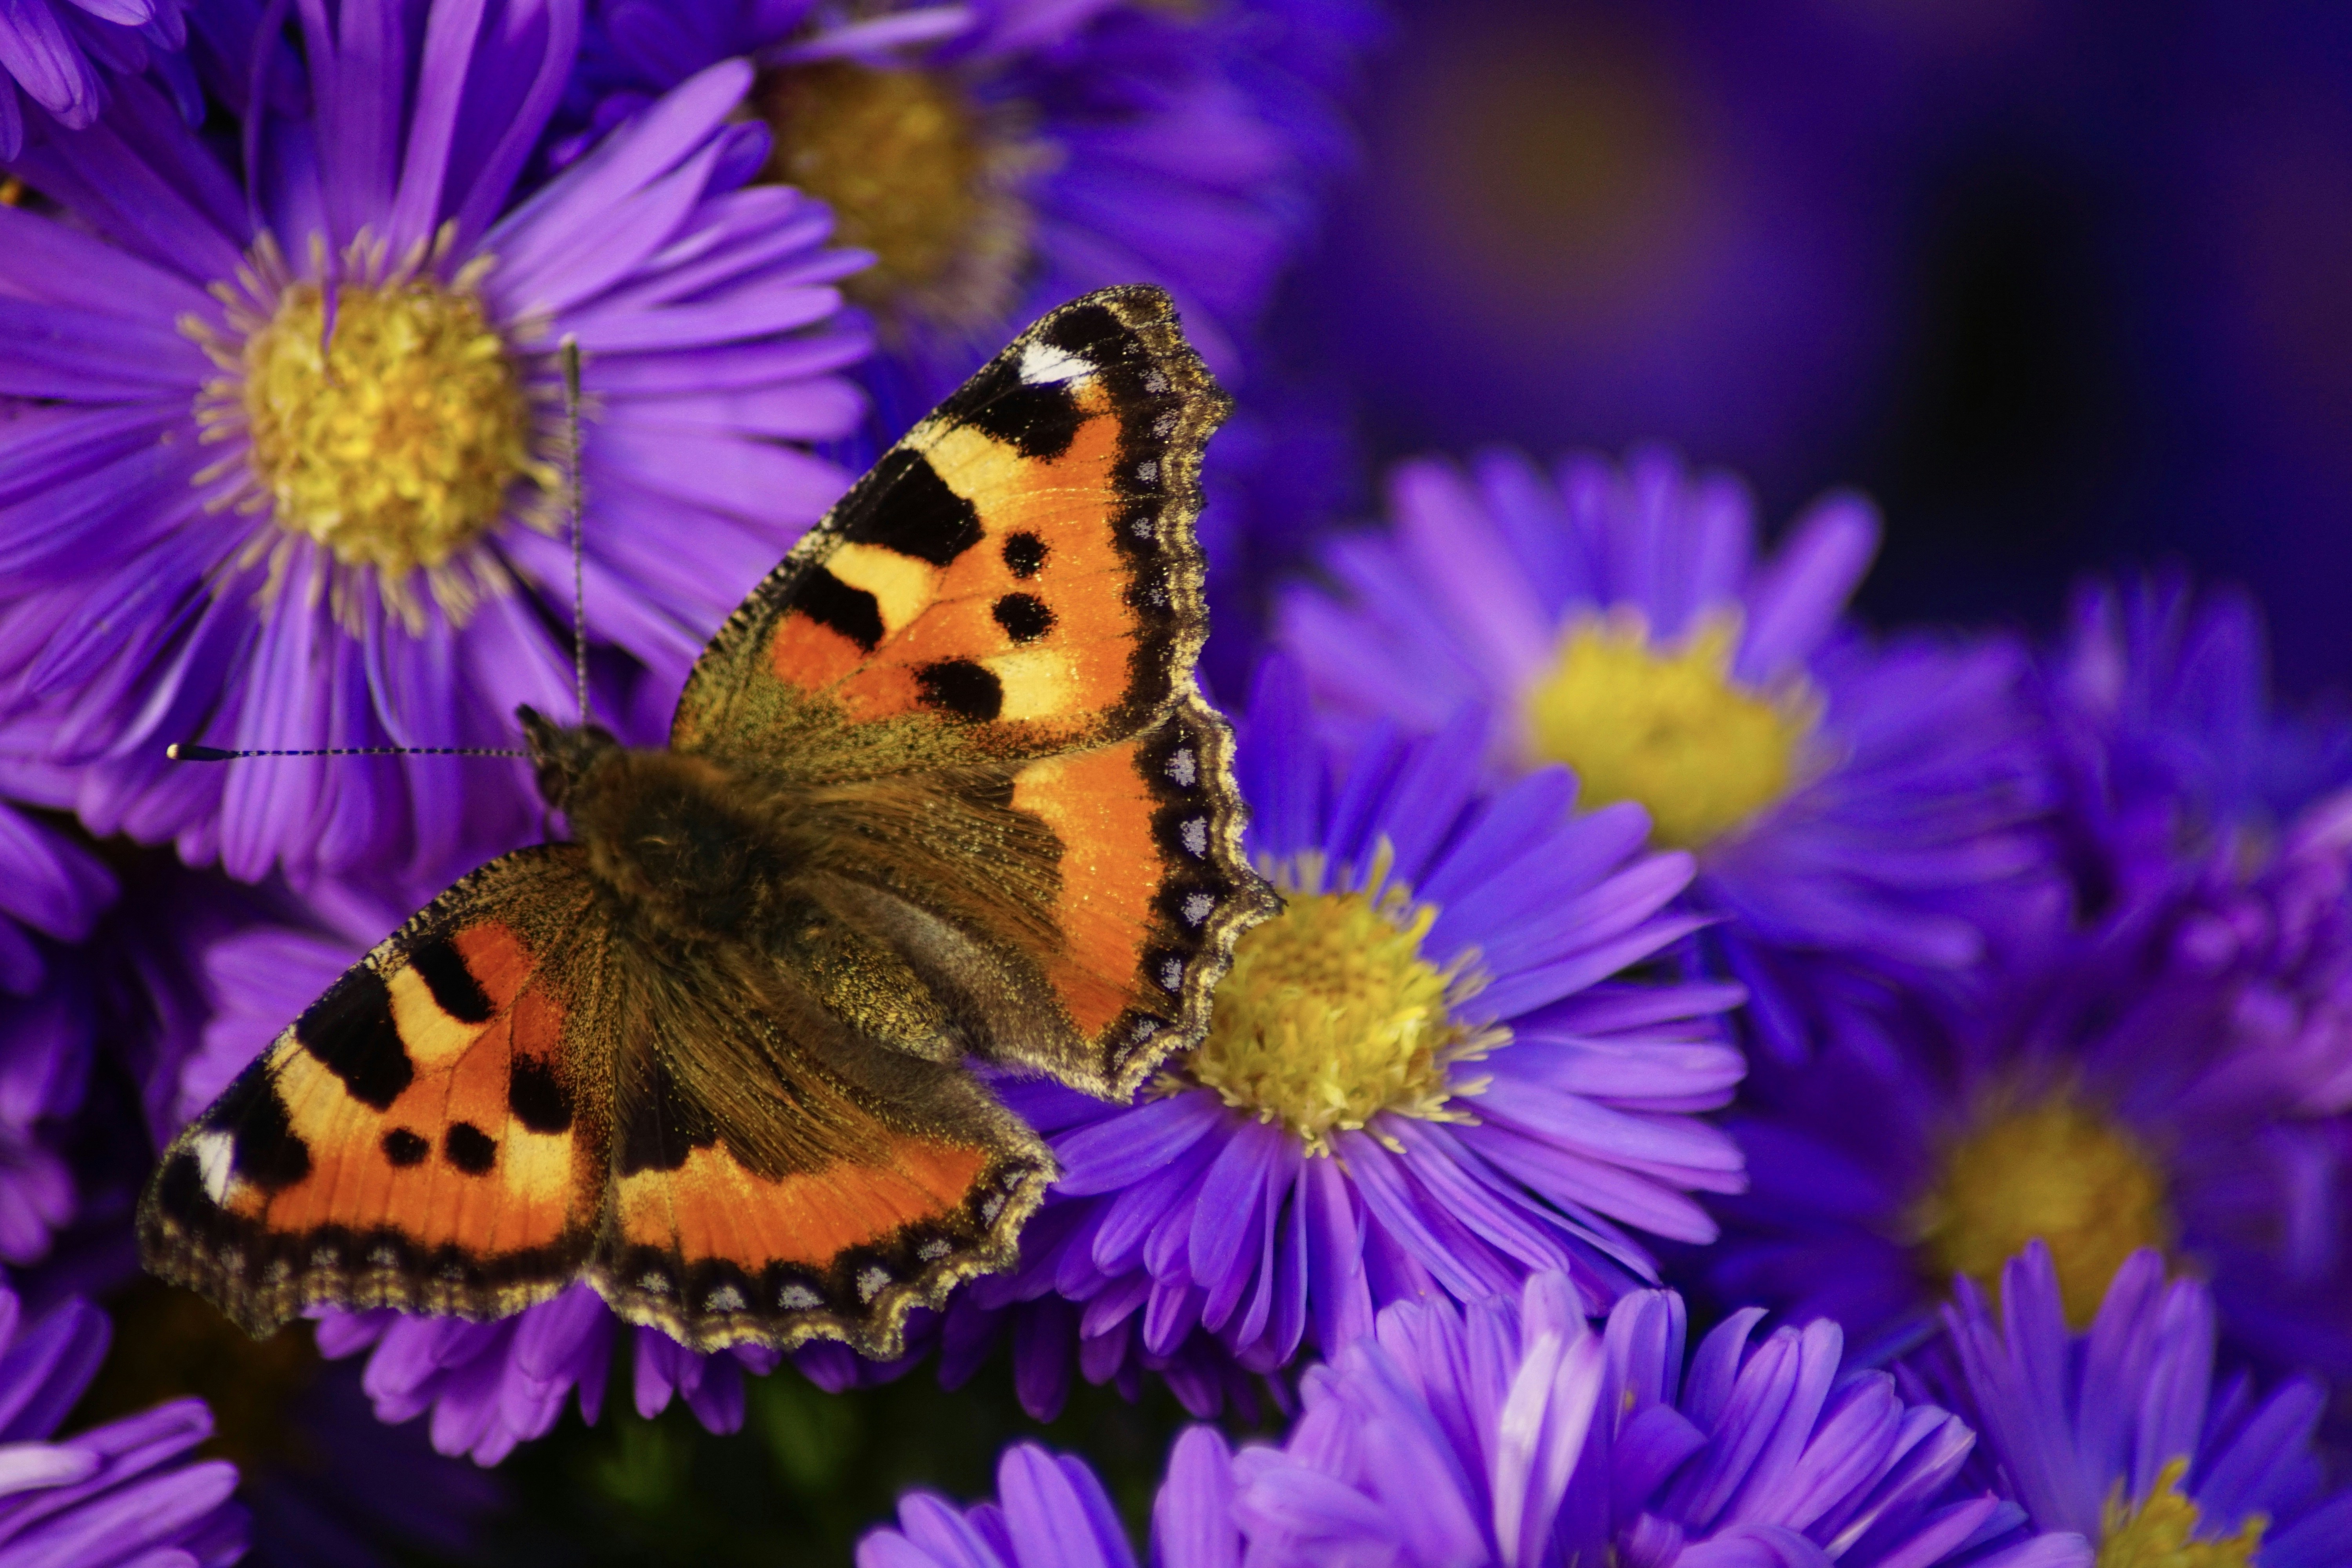 Indian summer Michaelmas Daisy and butterfly